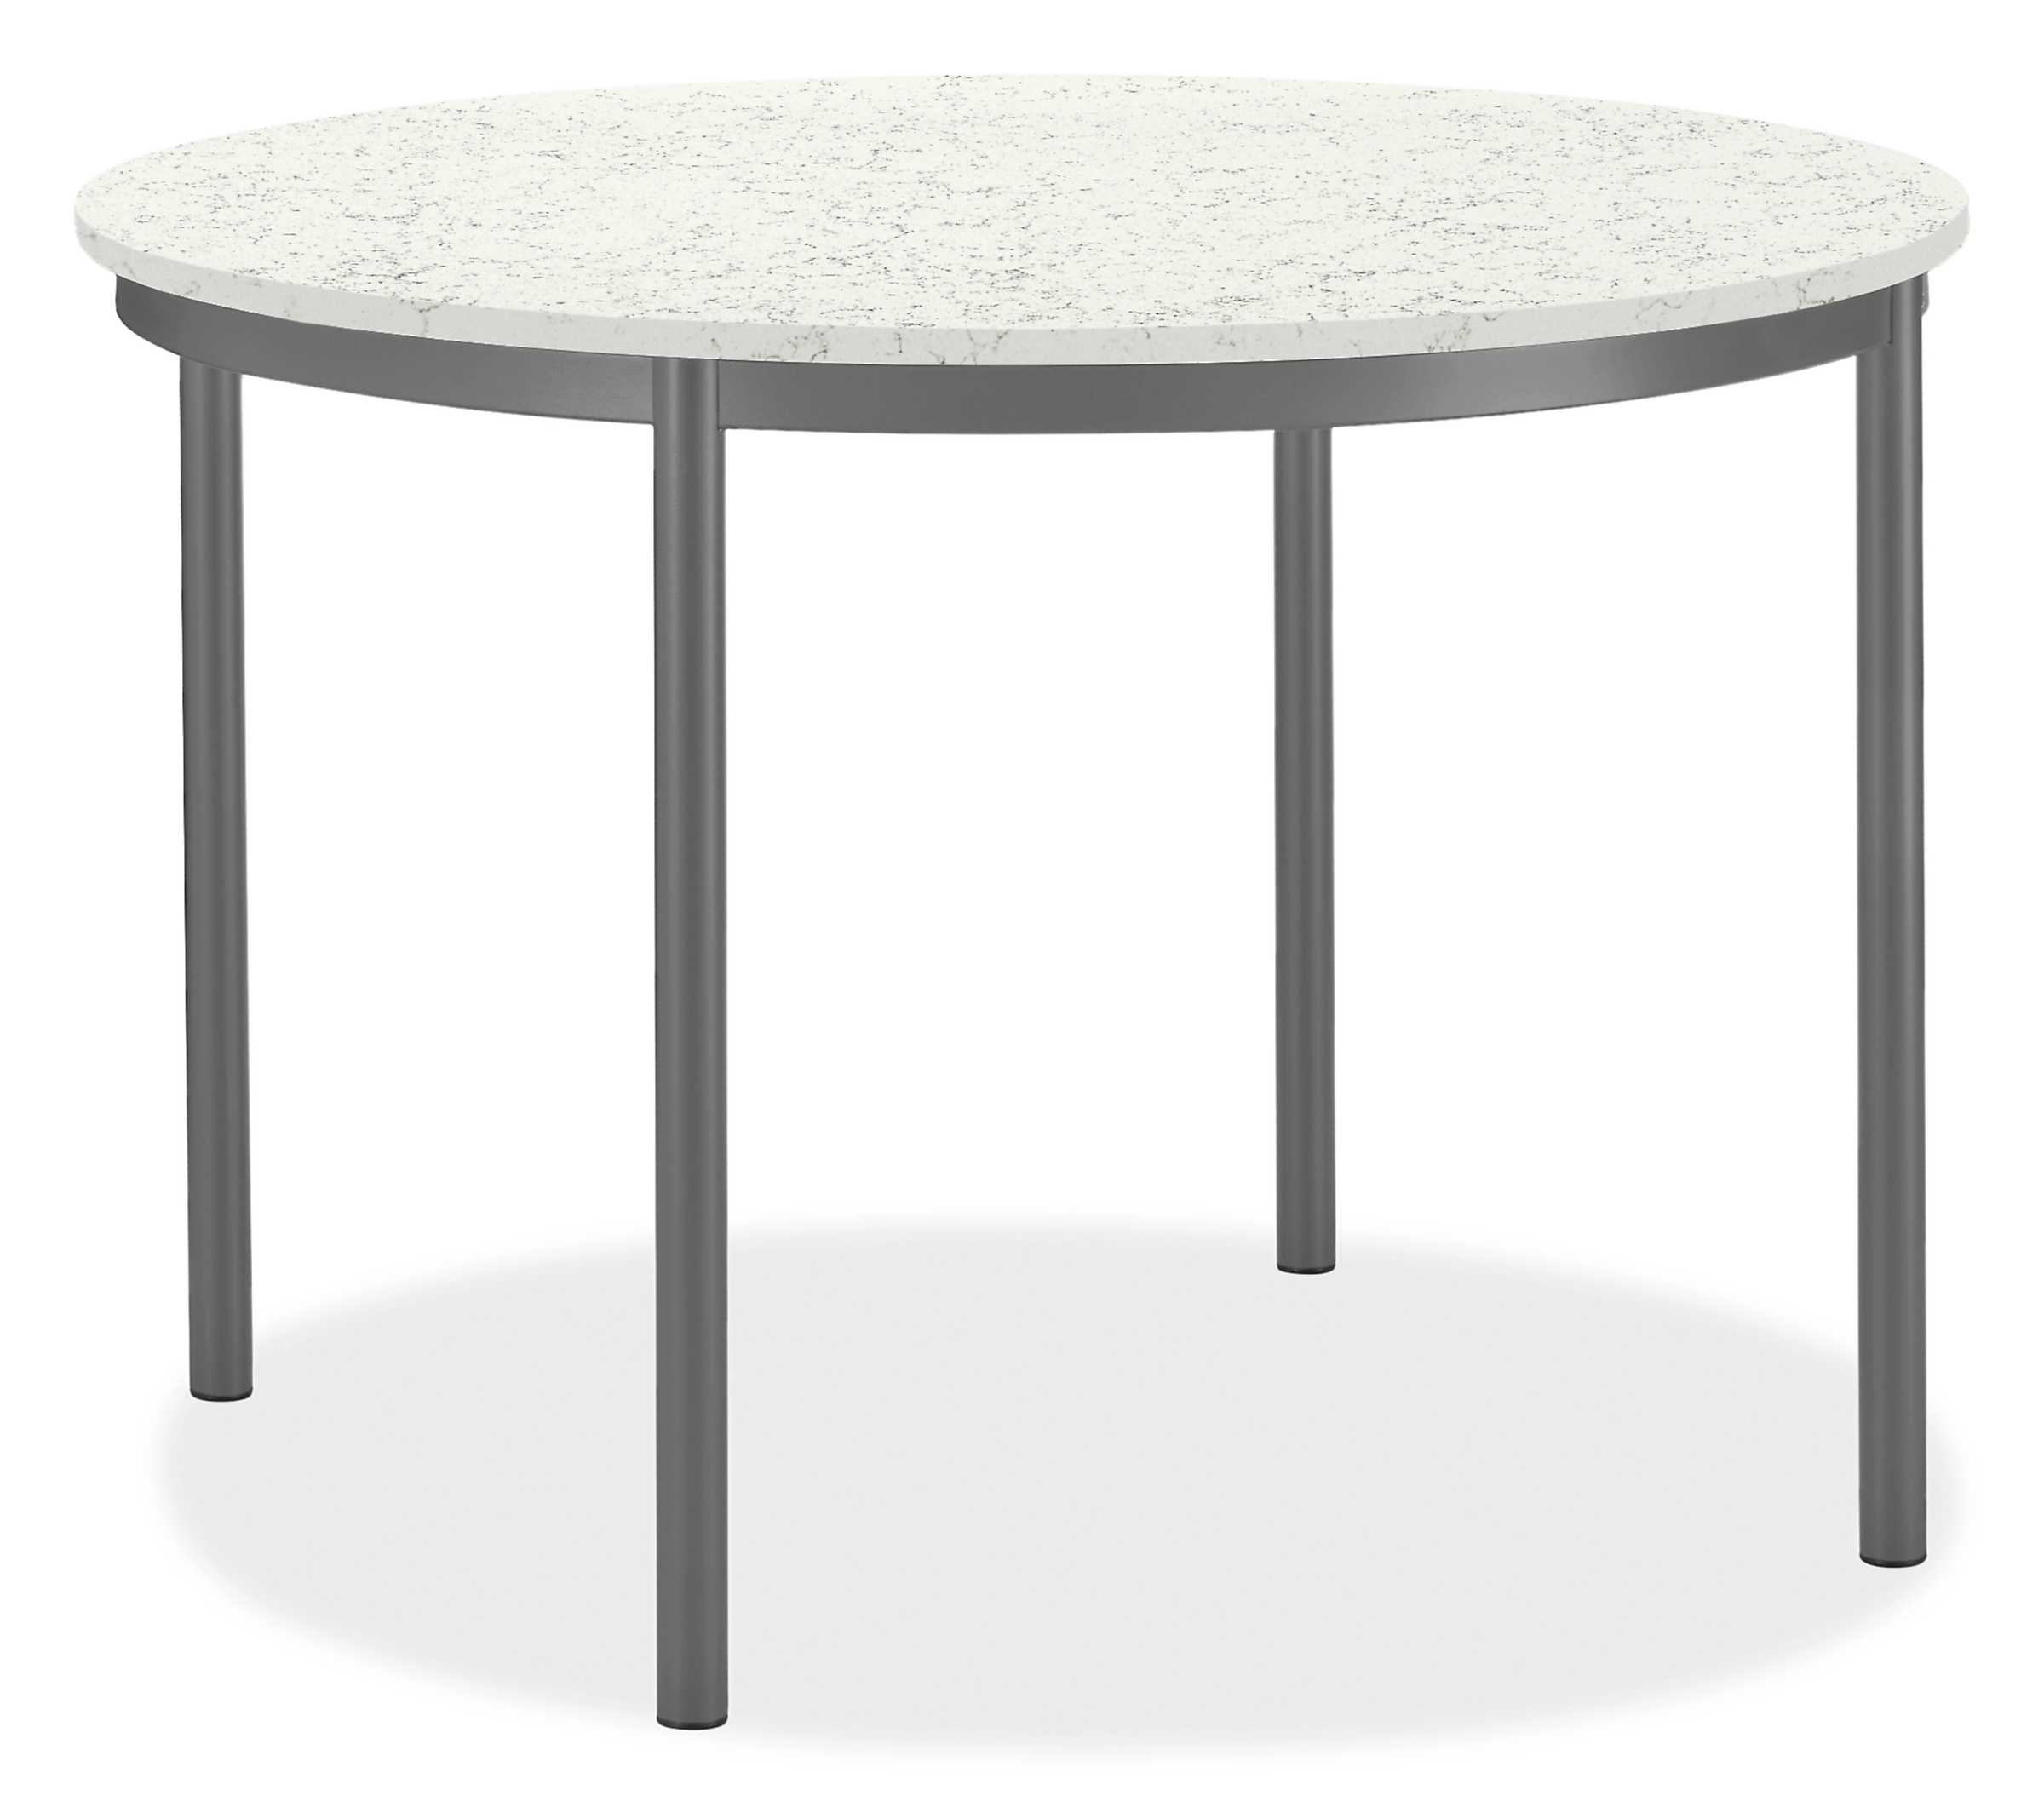 Westbrook 36 diam Table in Graphite with Marbled White Quartz Top